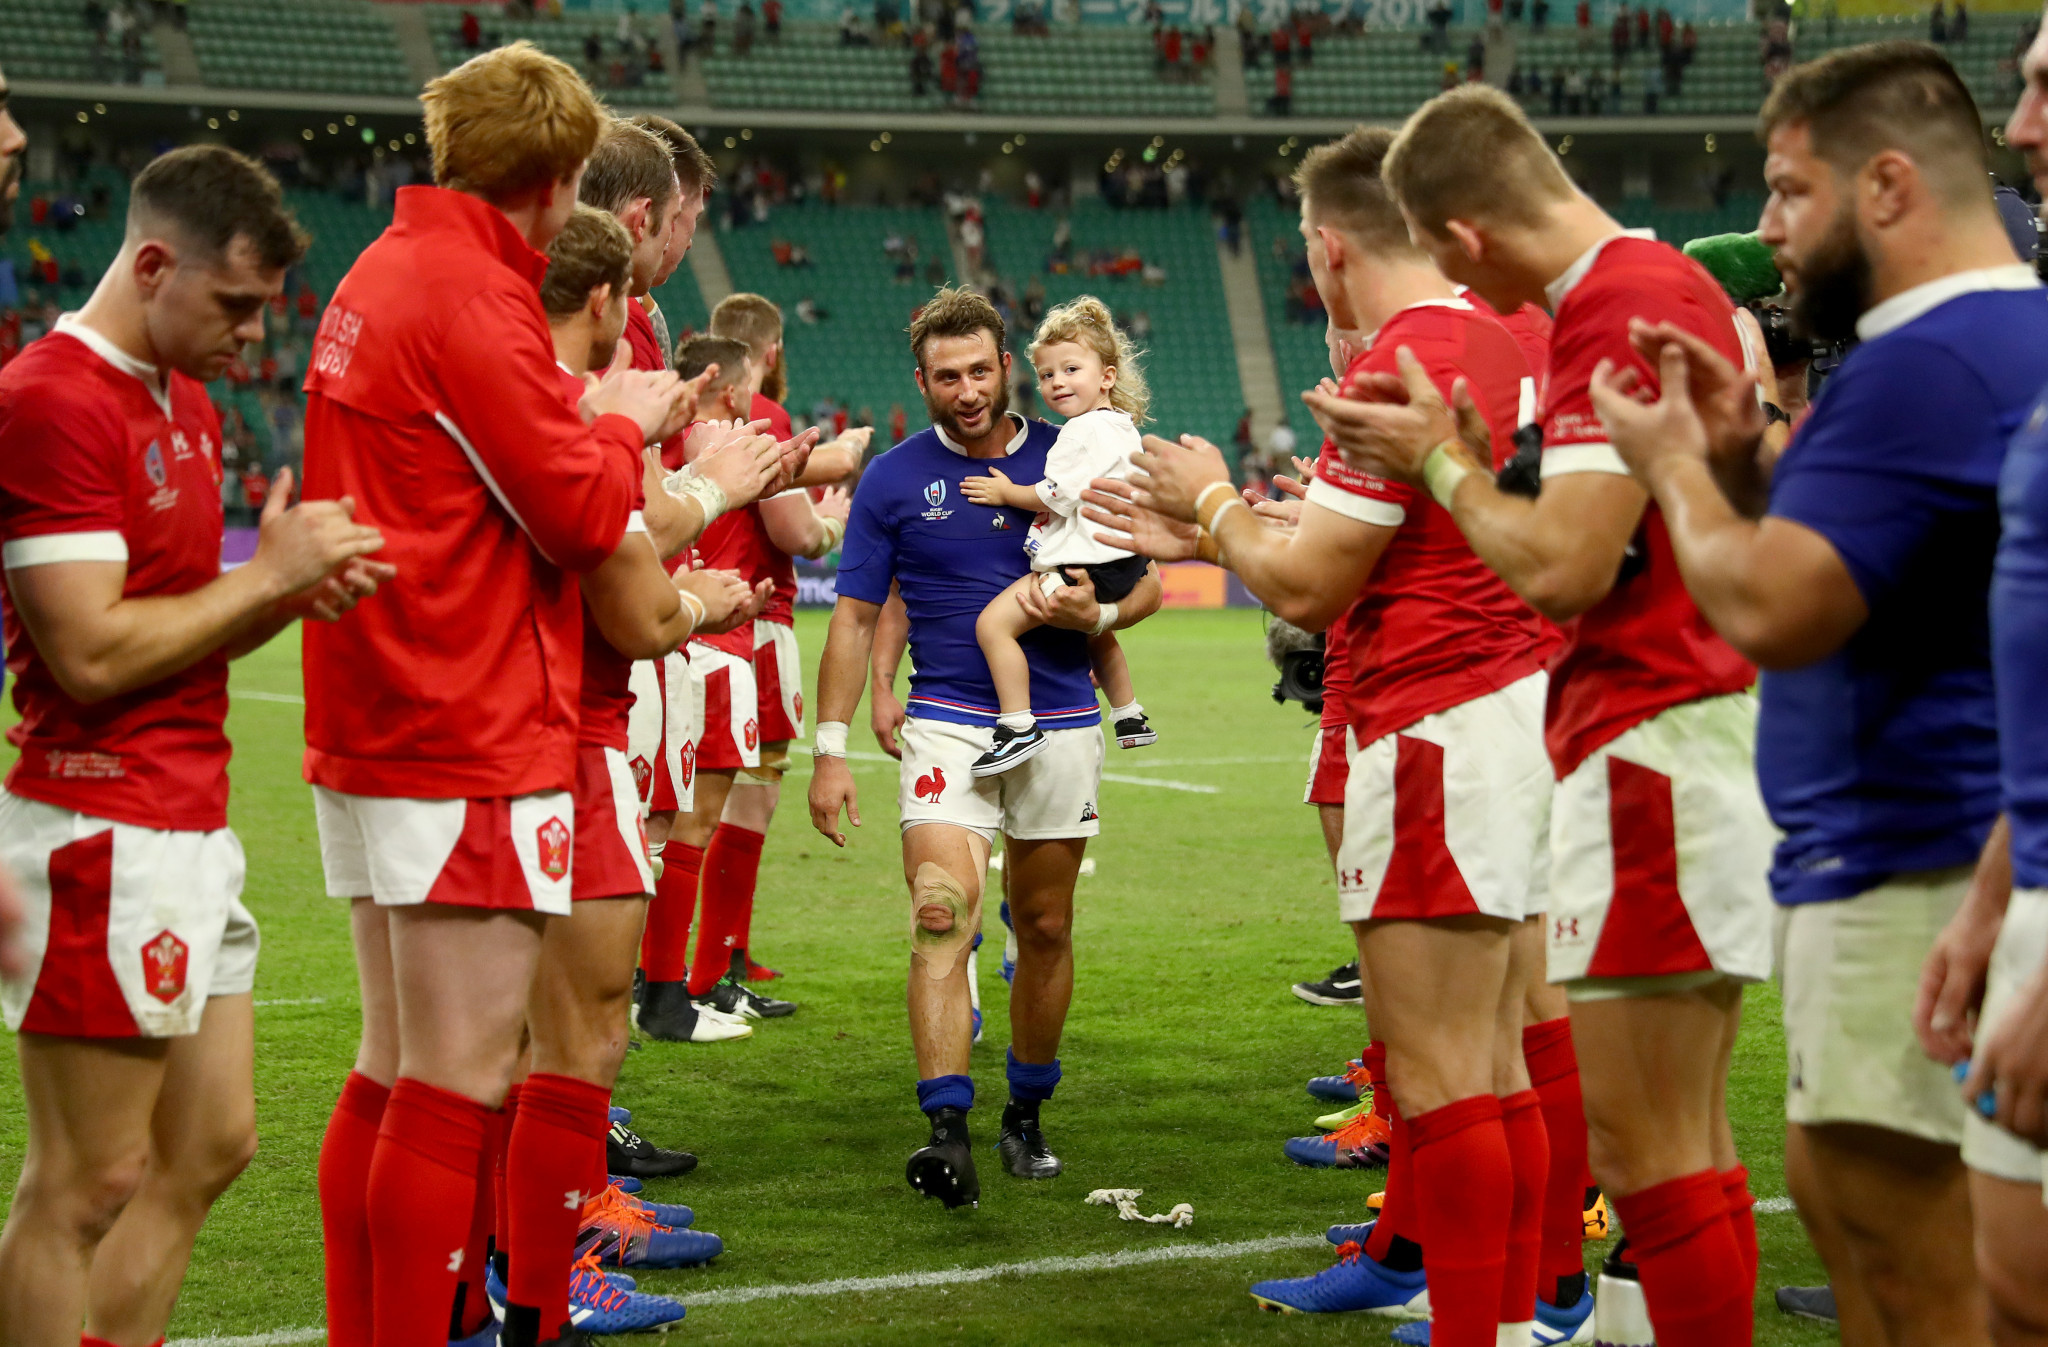 With Wales narrowly winning 20-19, the victors applauded the French team off the pitch ©Getty Images